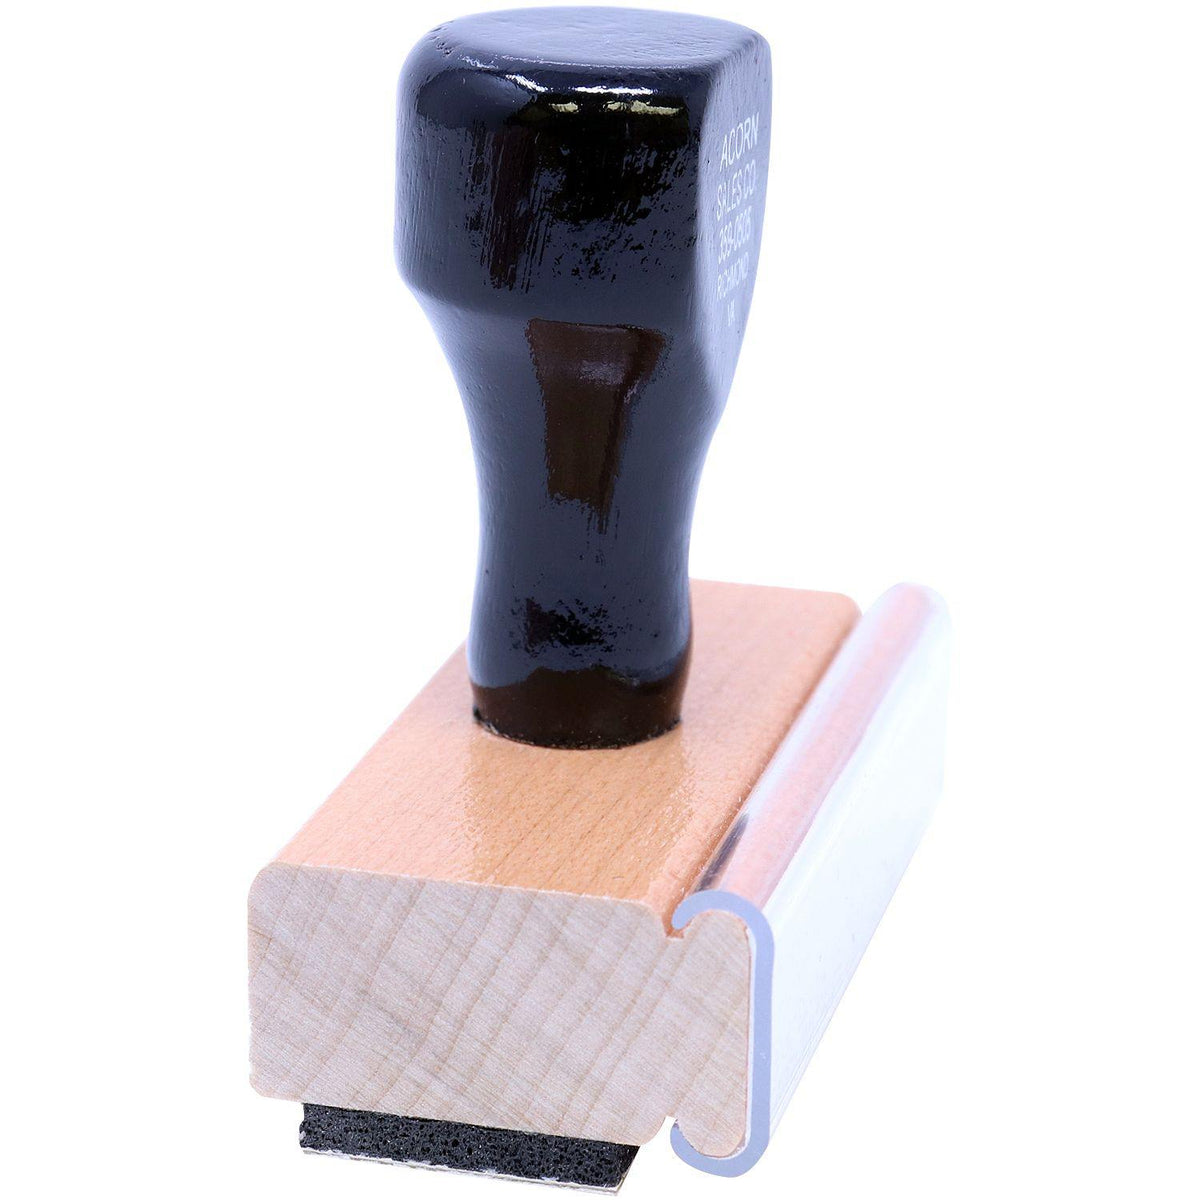 Side View of Large Asymptomatic Rubber Stamp at an Angle